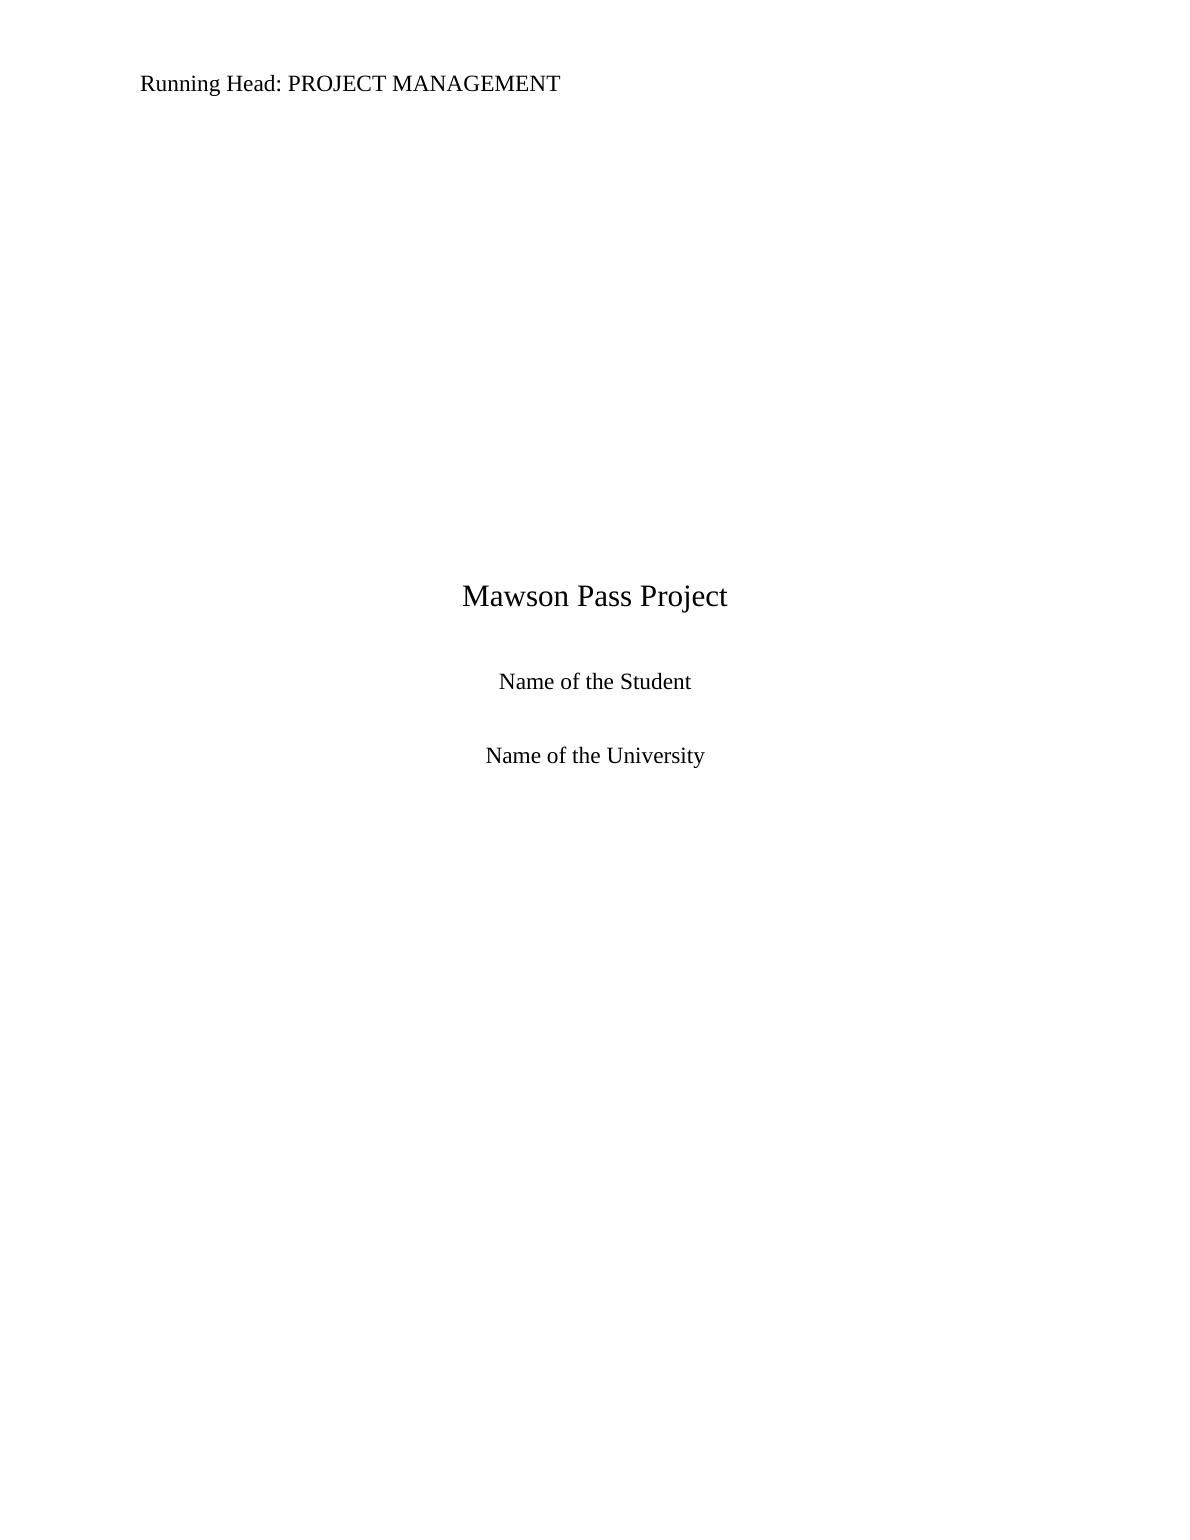 Assignment on Mawson Pass Project_1